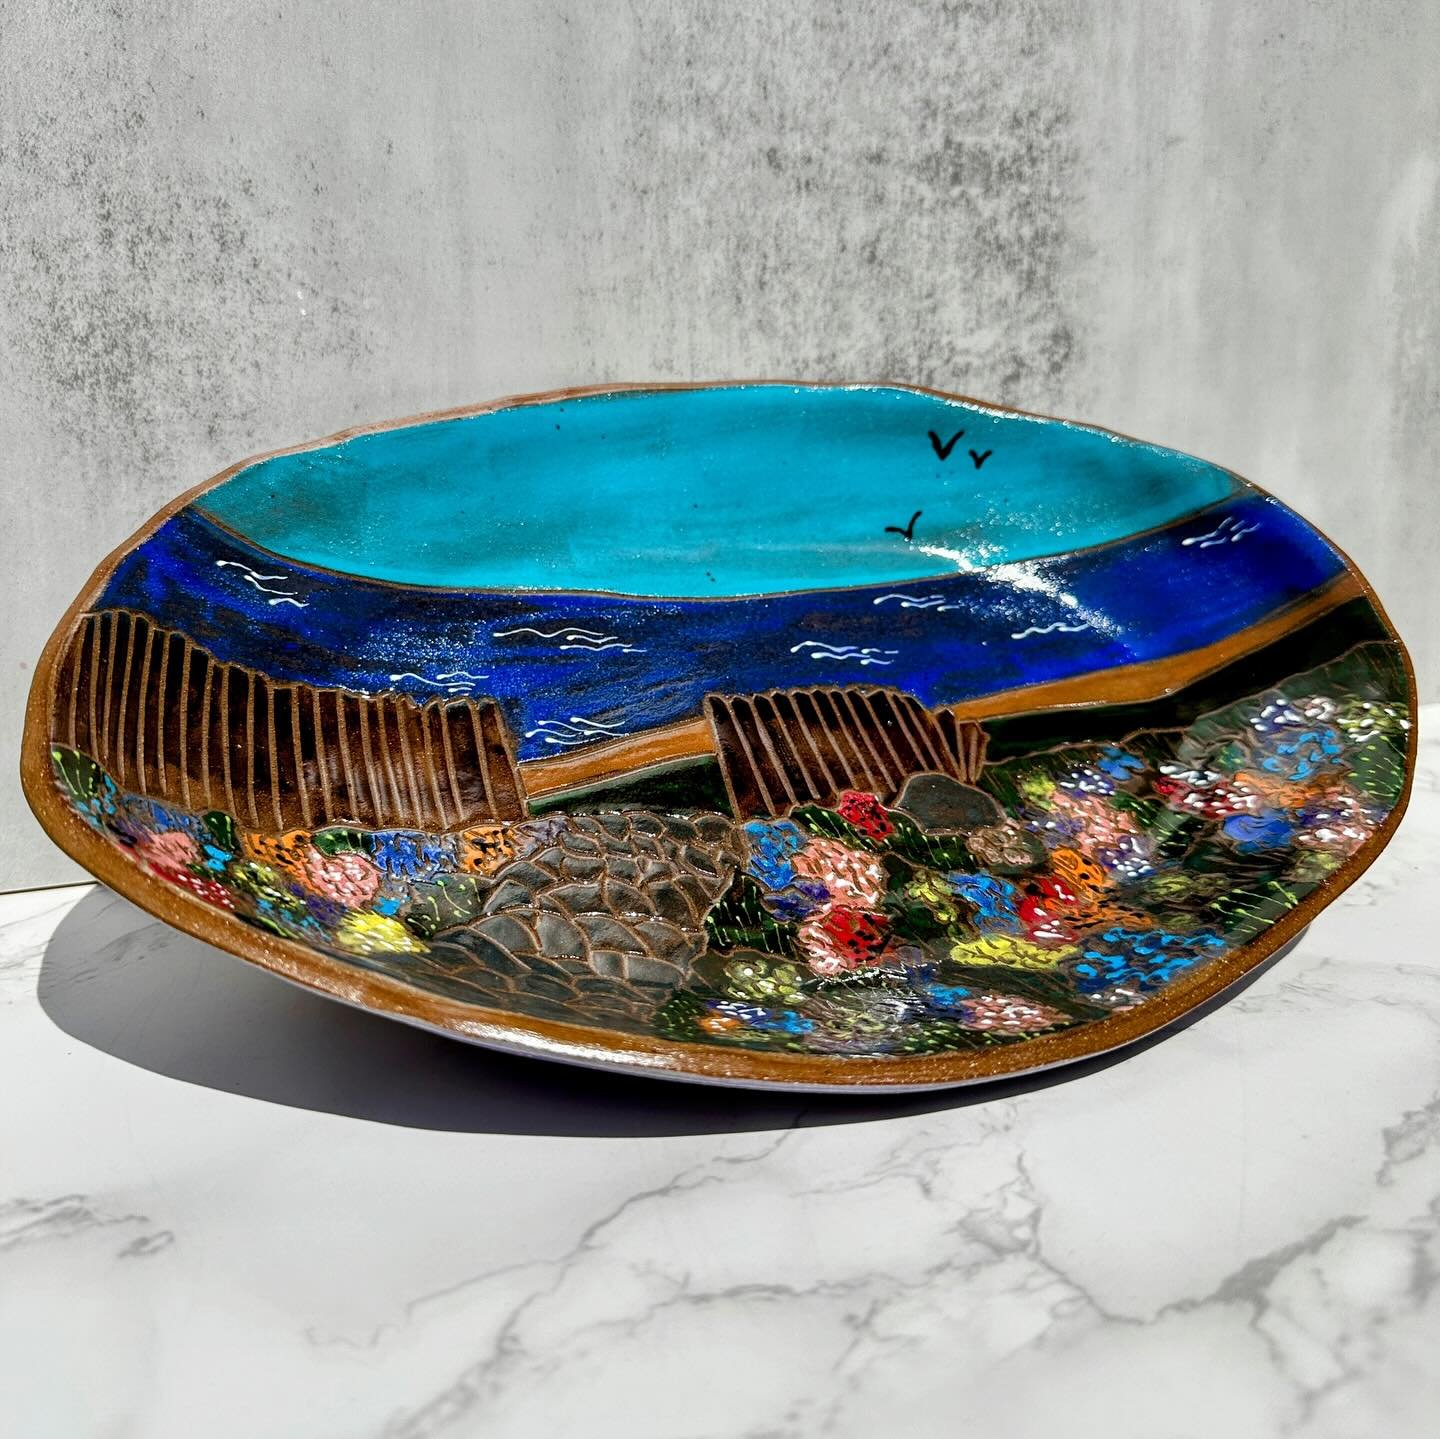 How&rsquo;s this for a dream view? Floral garden path leading to the sea. 🌊 🌸 ☀️ 

I made canvases out of slab-built oval dishes and decorated them with underglaze painting and carving. 

I&rsquo;m really liking this new shape (basically, mom made 